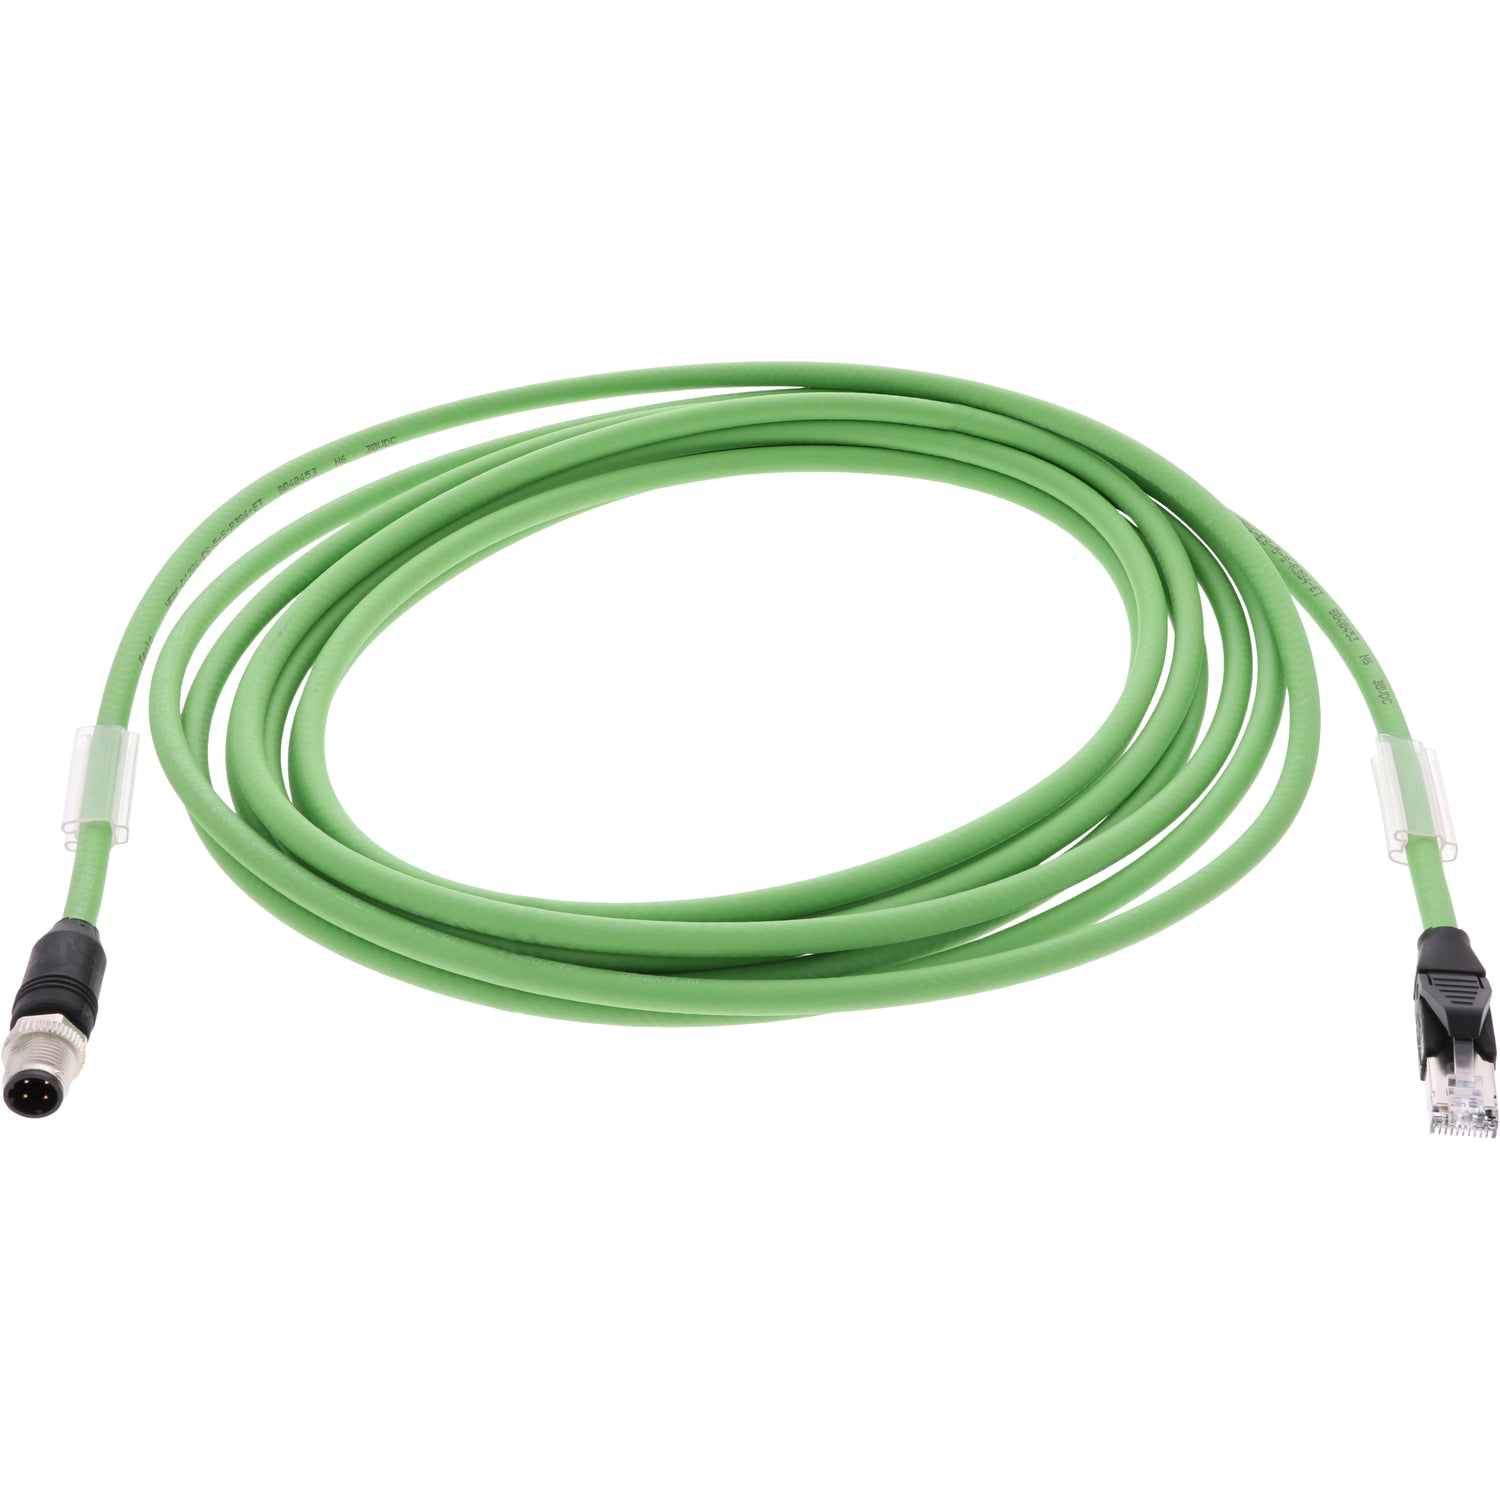 Green 5 meter connecting cable with nickel-plated, four-pin male connector on one end and an RJ45 plug on the other. Cable shown on white background. 